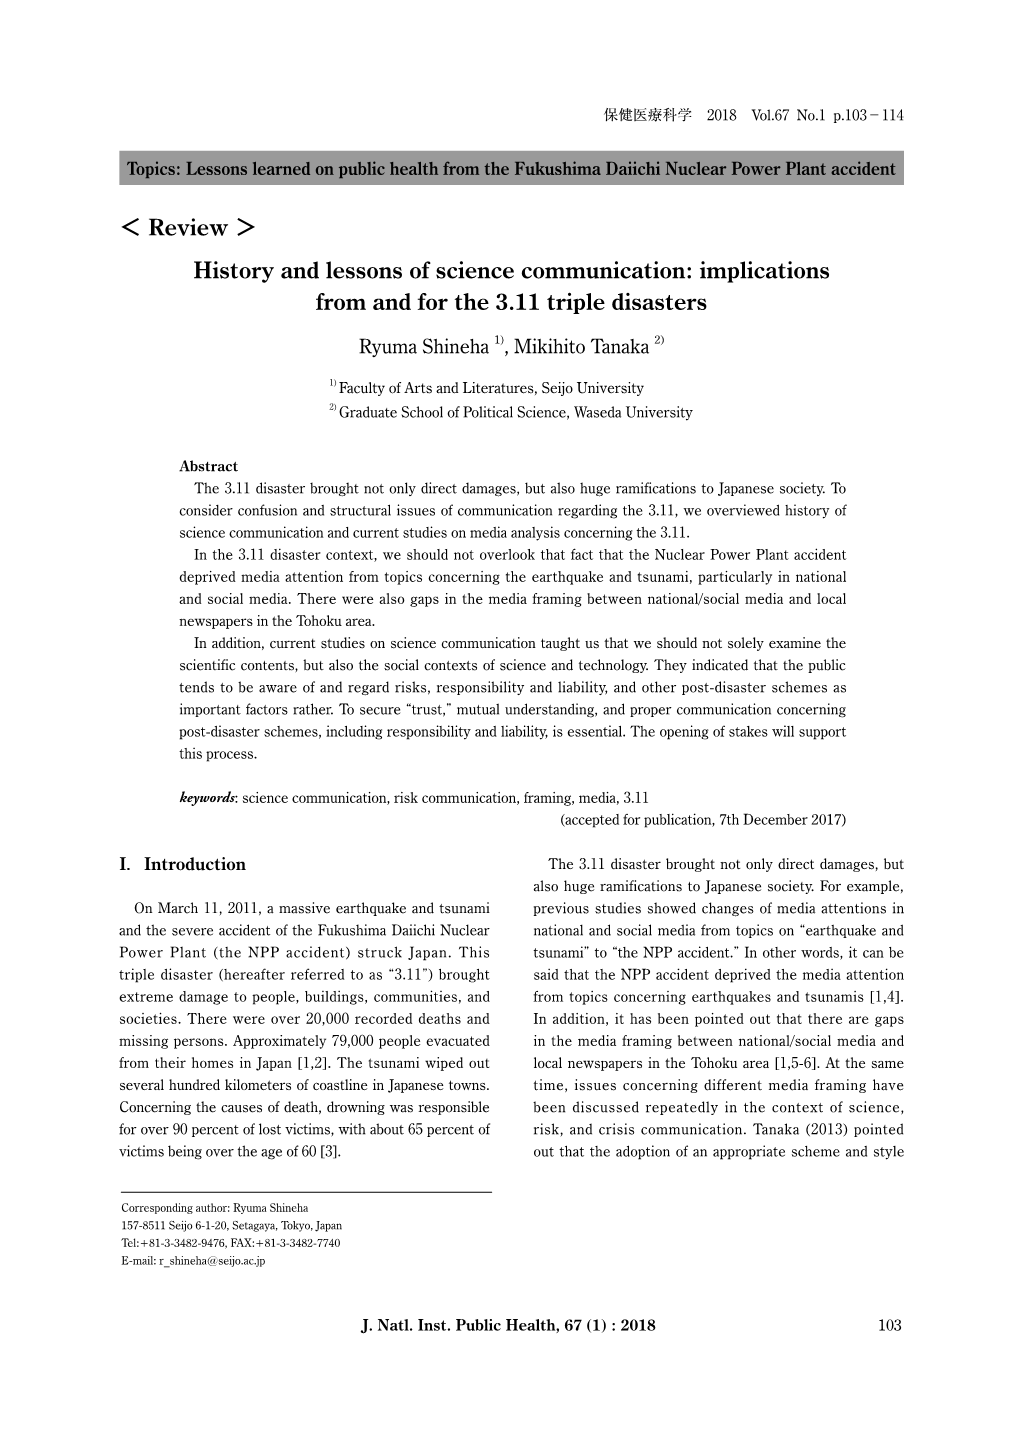 History and Lessons of Science Communication: Implications from and for the 3.11 Triple Disasters